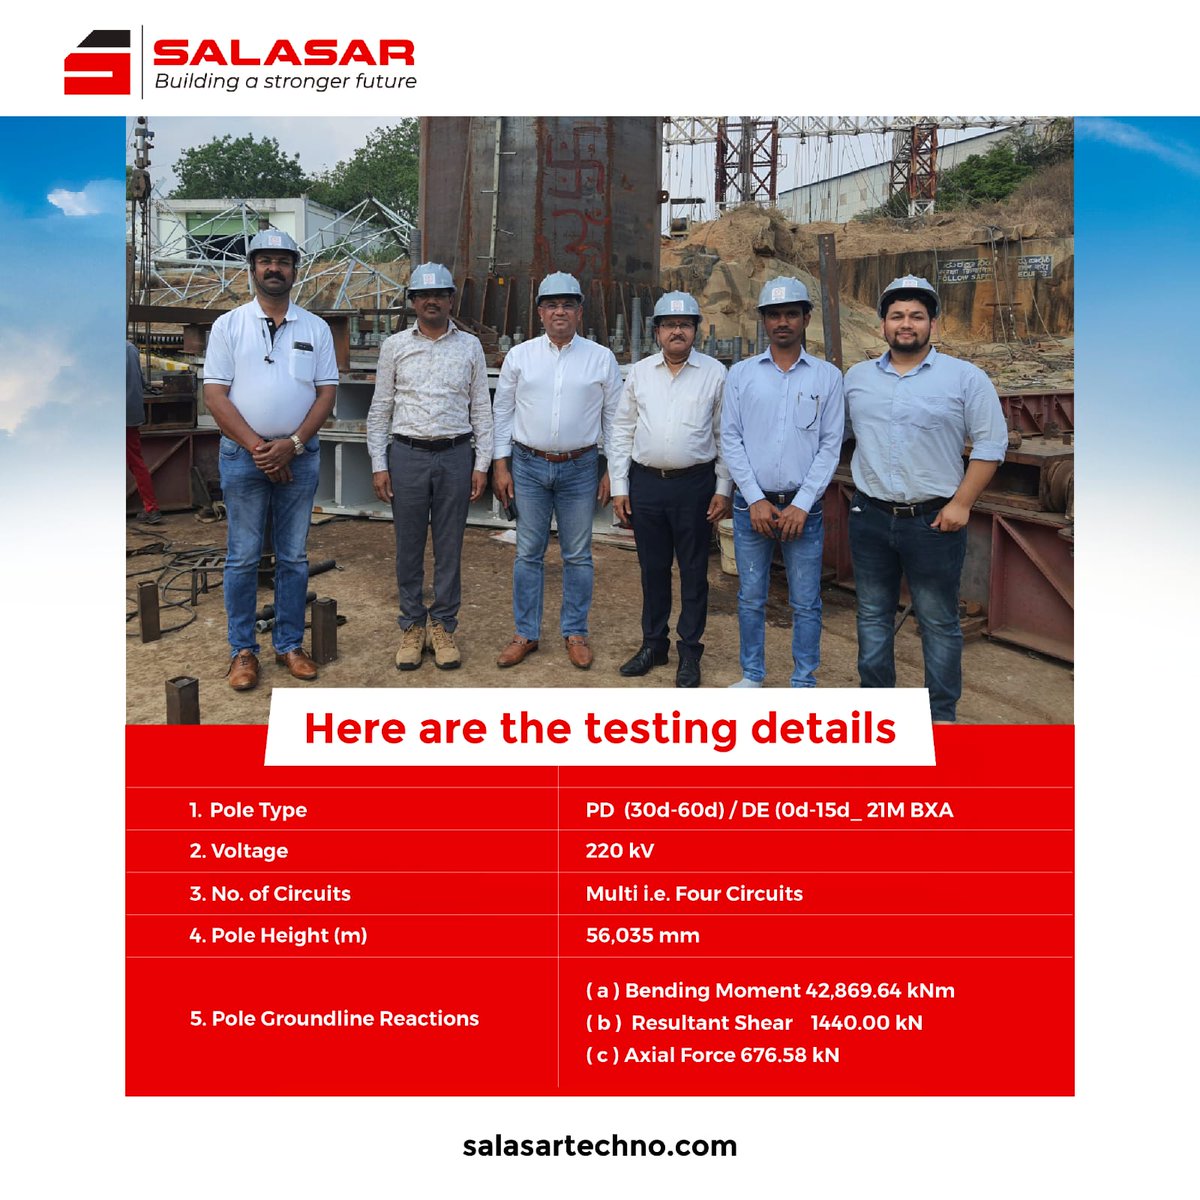 Salasar has emerged as the global leader in utility pole design, manufacturing, supply, and testing by maintaining customers' commitments with superior-quality deliverables. 

#utilitypoles #indianutilityindustry #achievement #innovation #salasartechnoengineering #engineering